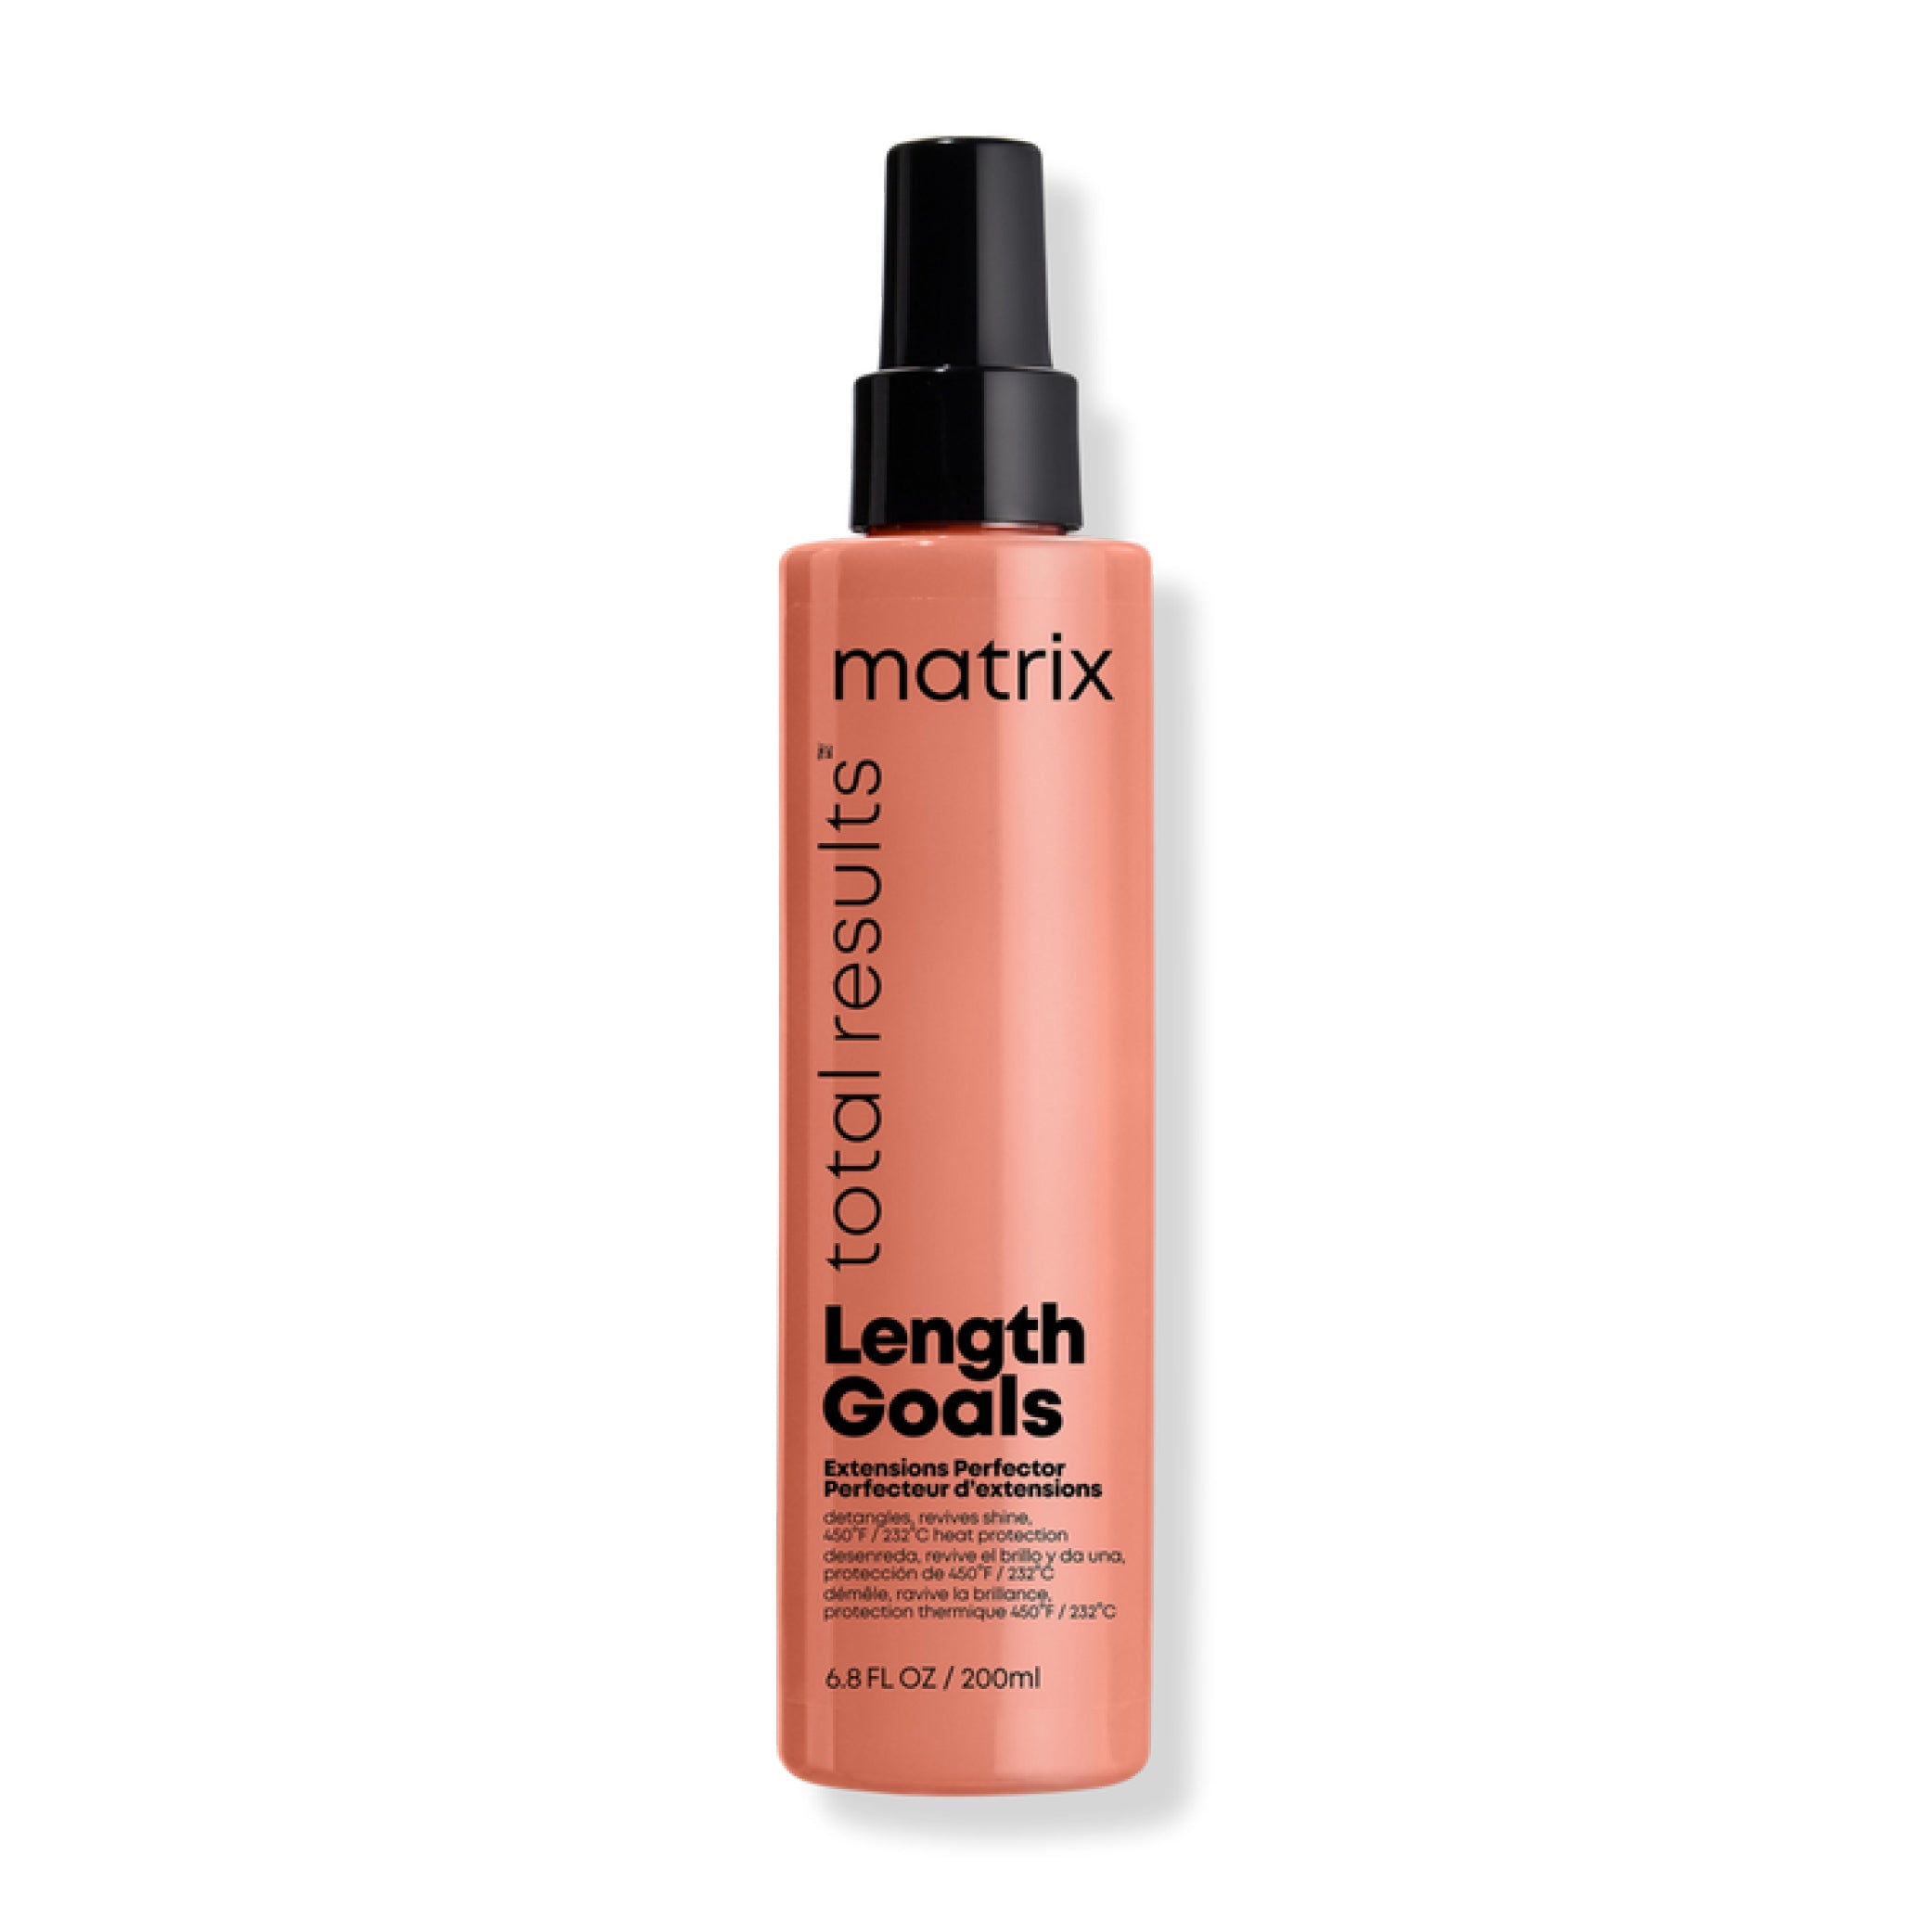 Length Goals Spray for Extensions